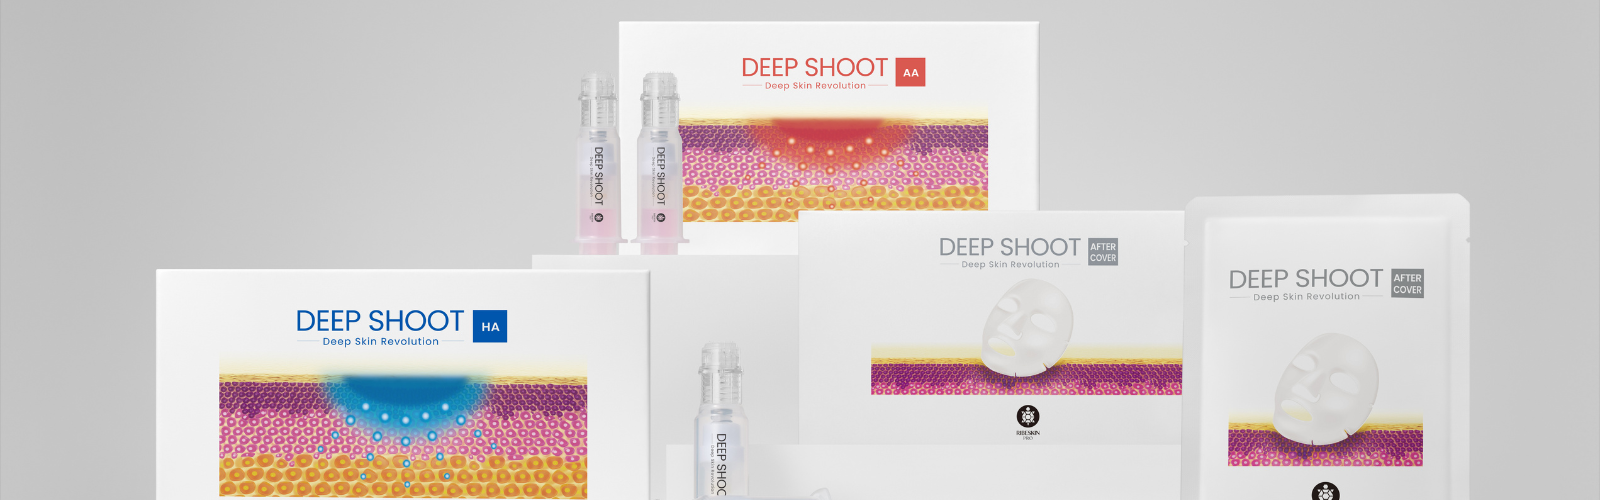 Why DEEP SHOOT is Superior to Microneedling for Glass Skin